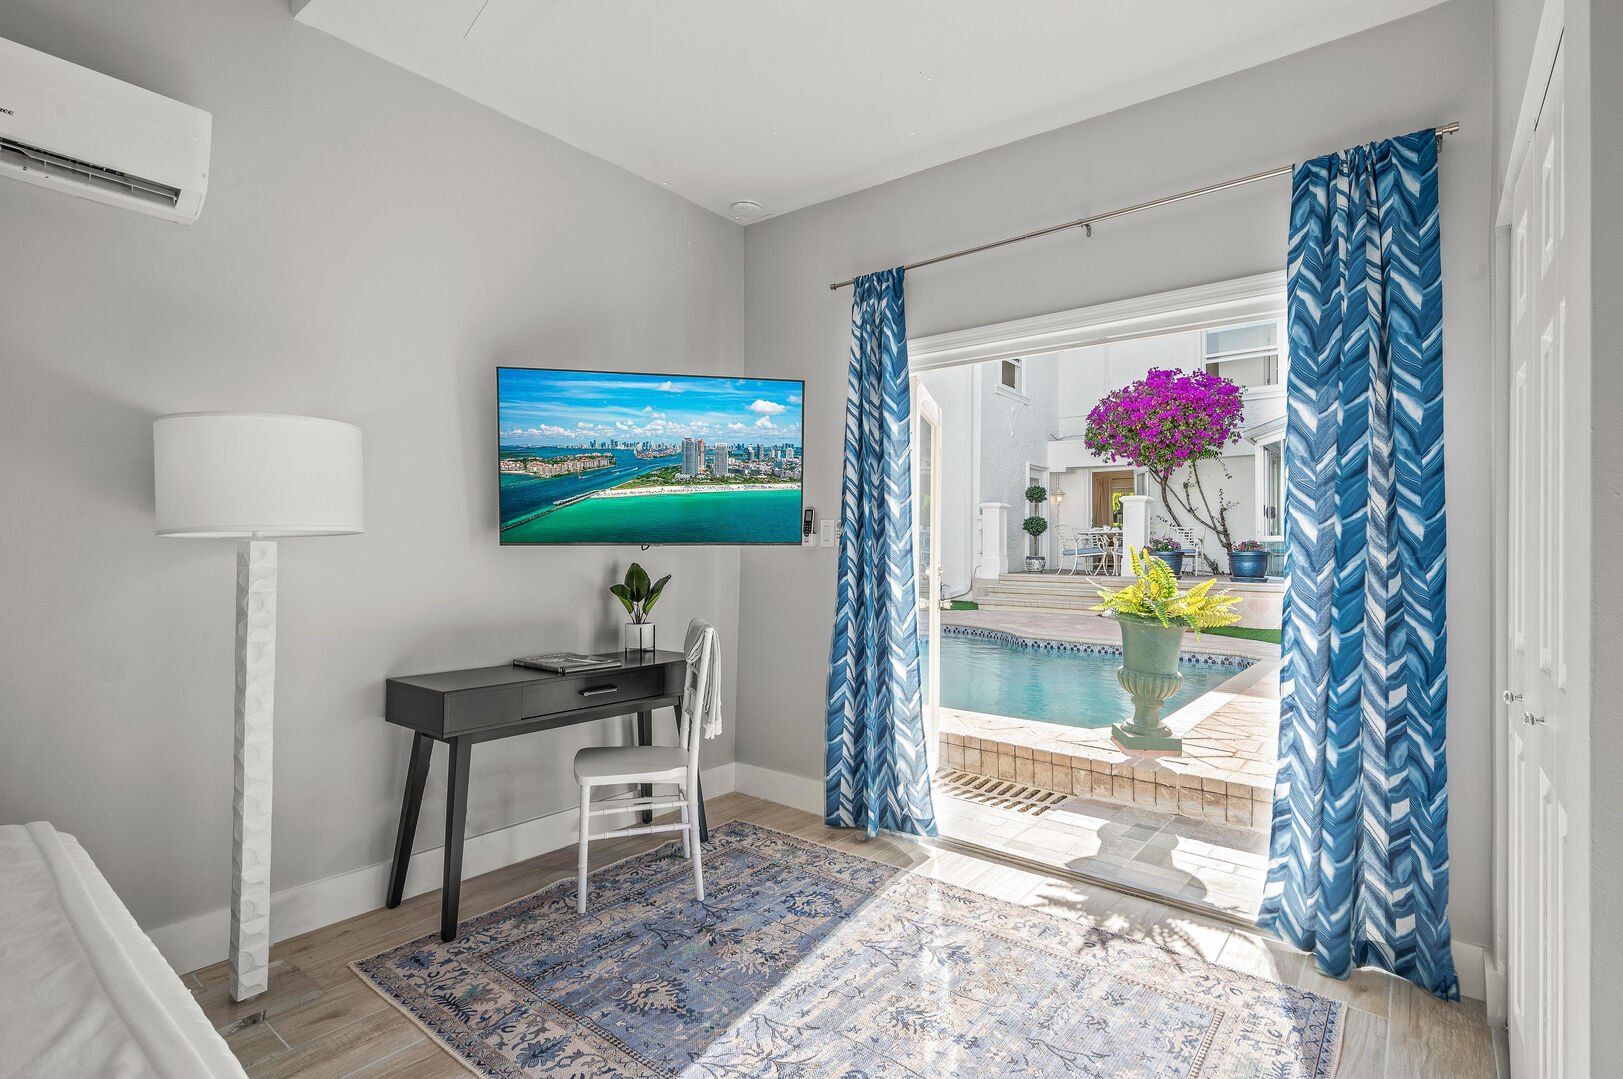 Soak in the views of the heated pool from the fourth bedroom while you're watching the smart TV.